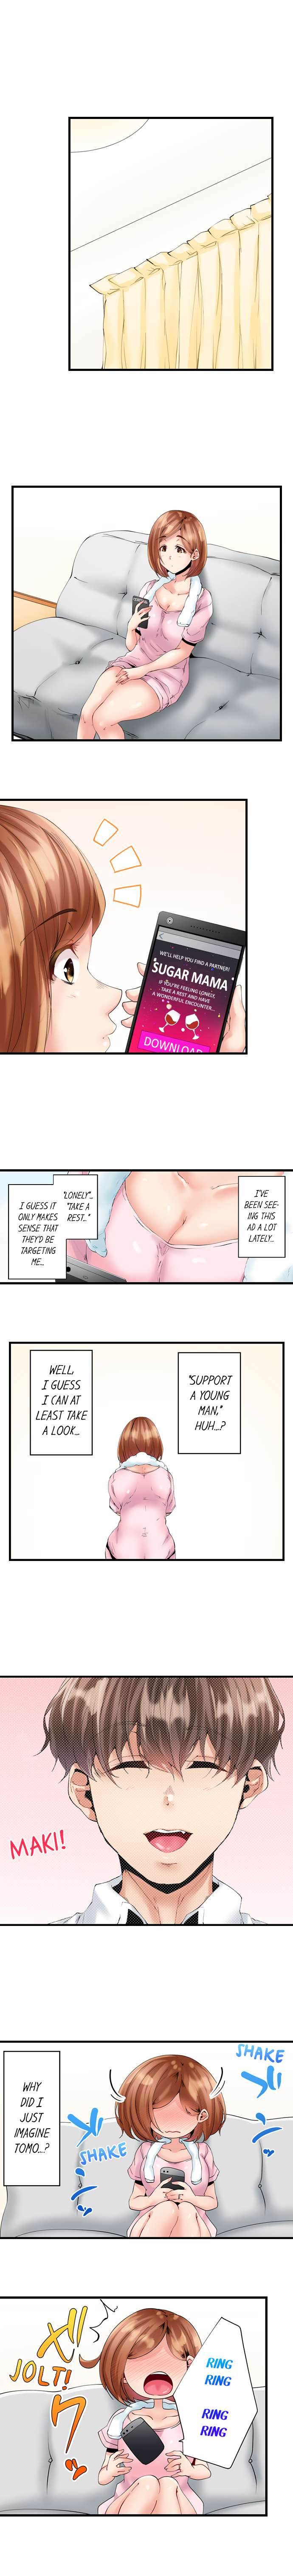 A Rebellious Girl's Sexual Instruction by Her Teacher - Chapter 1 Page 6